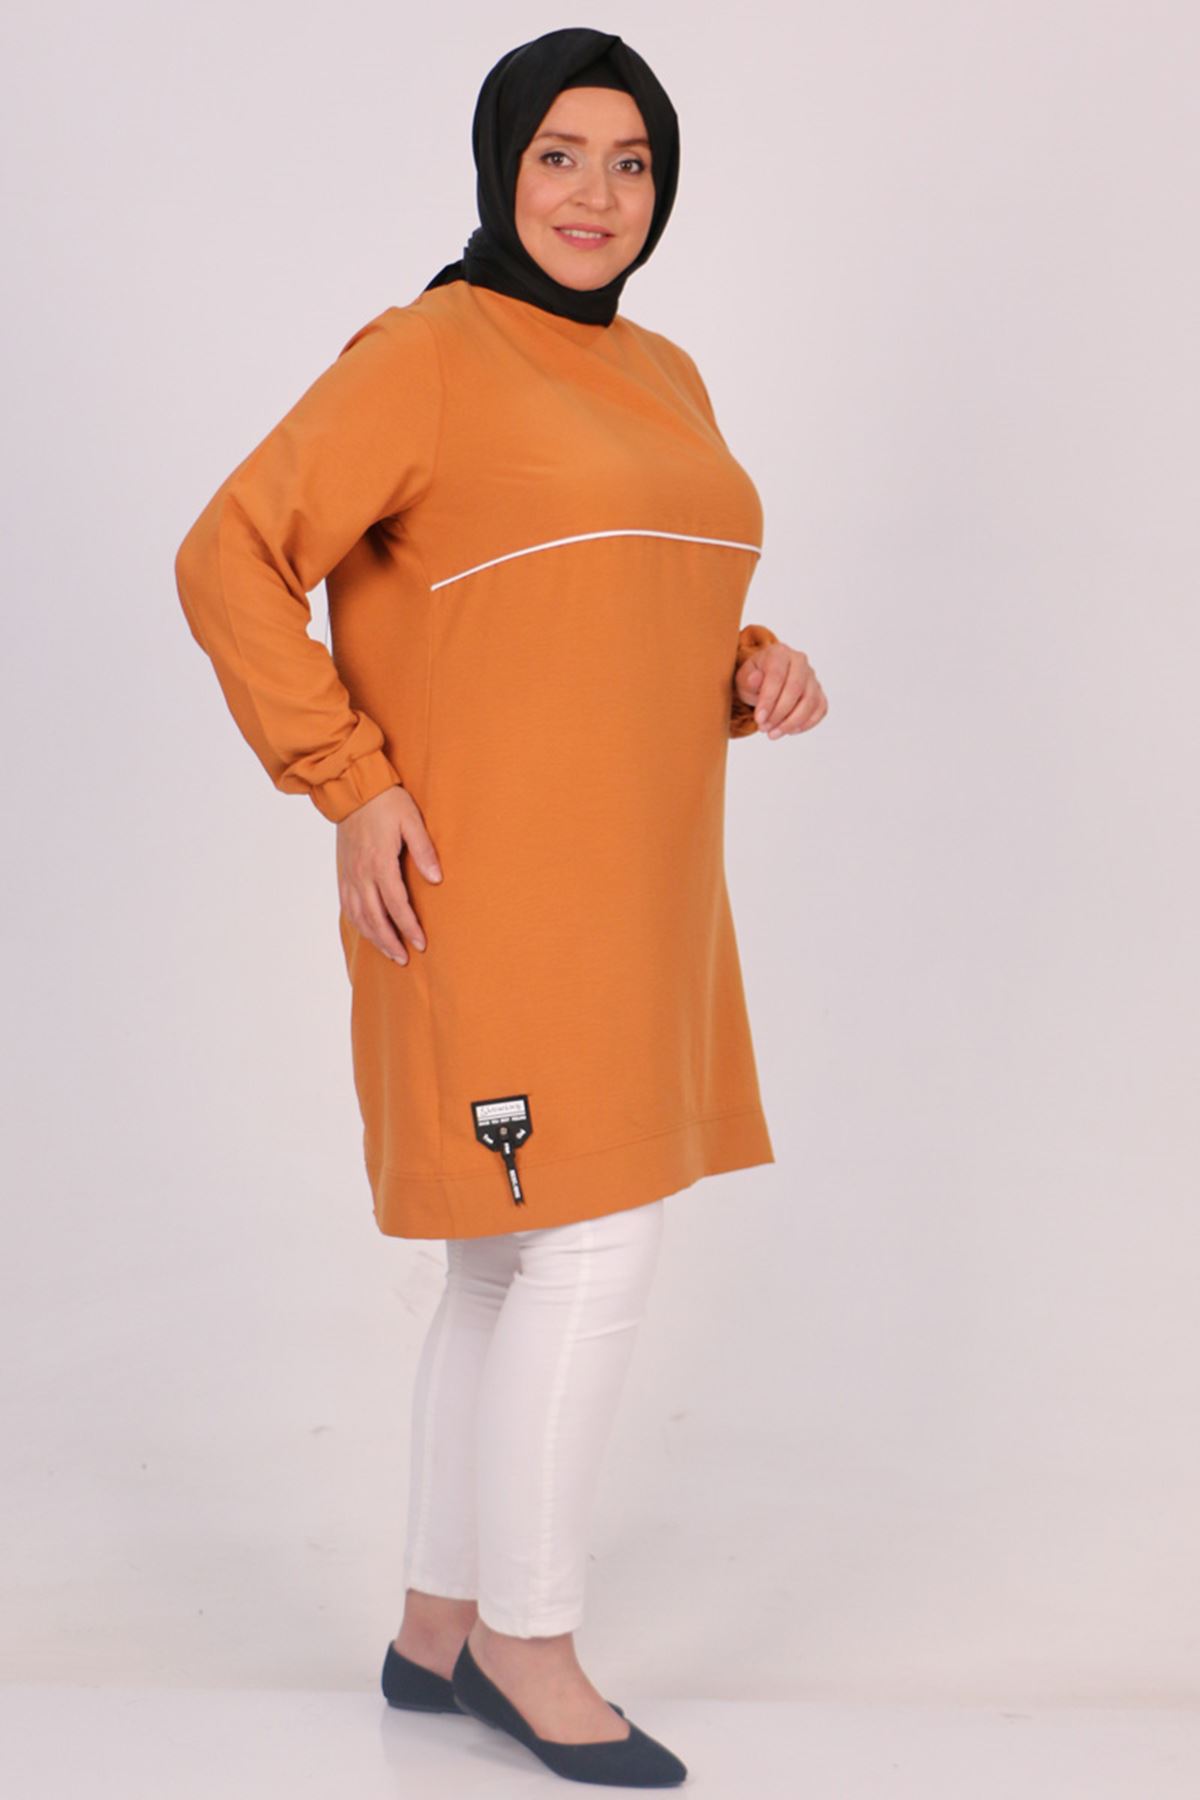 38008 Large Size Miracle Tunic With Split Line -Tan